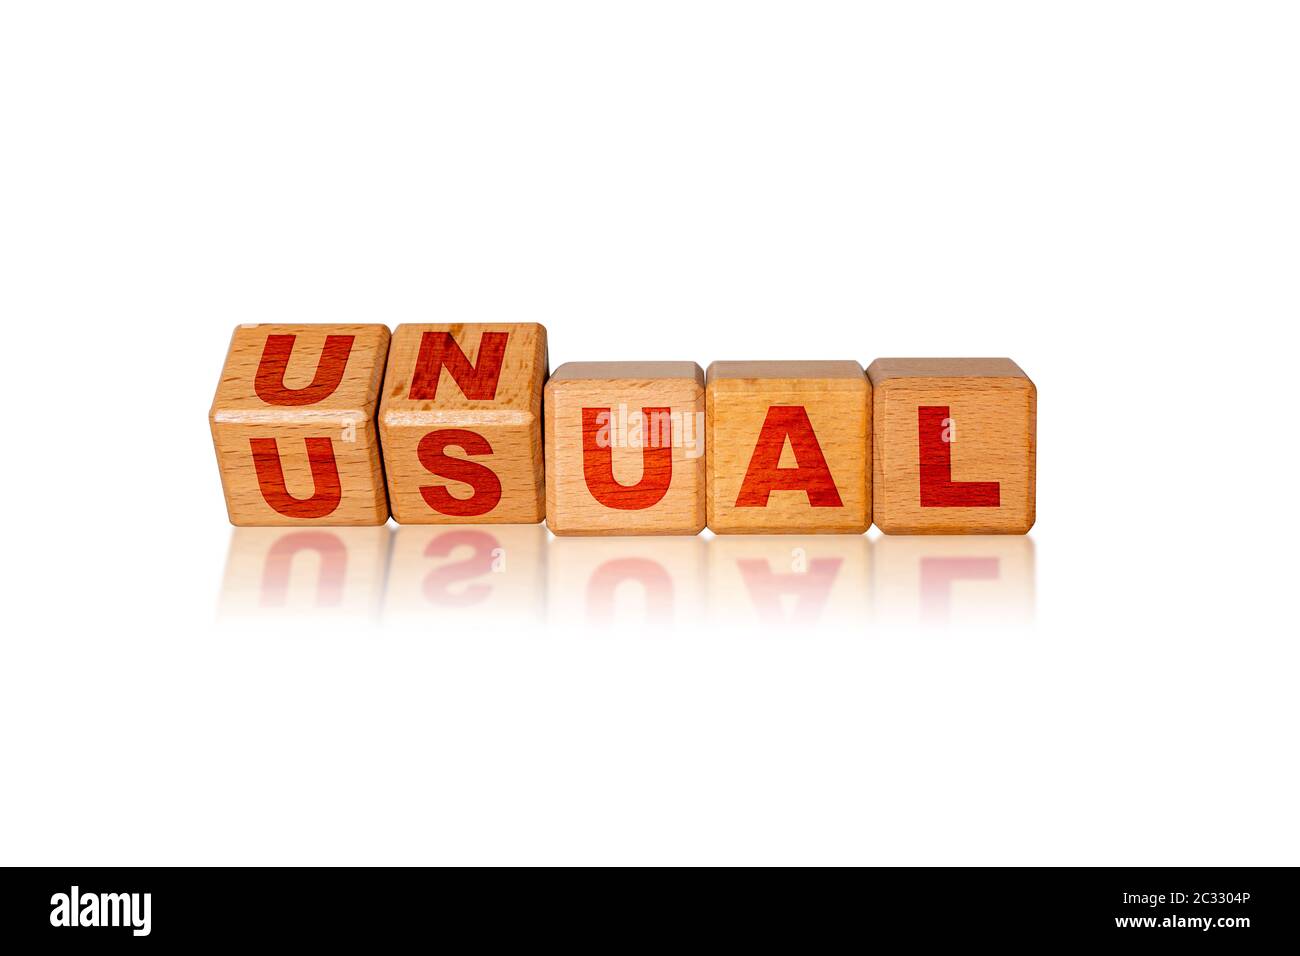 Concept of the word Unusual displayed in unconventional way by use of alphabet blocks. Business as Unusual after Covid-19 coronavirus pandemic because Stock Photo